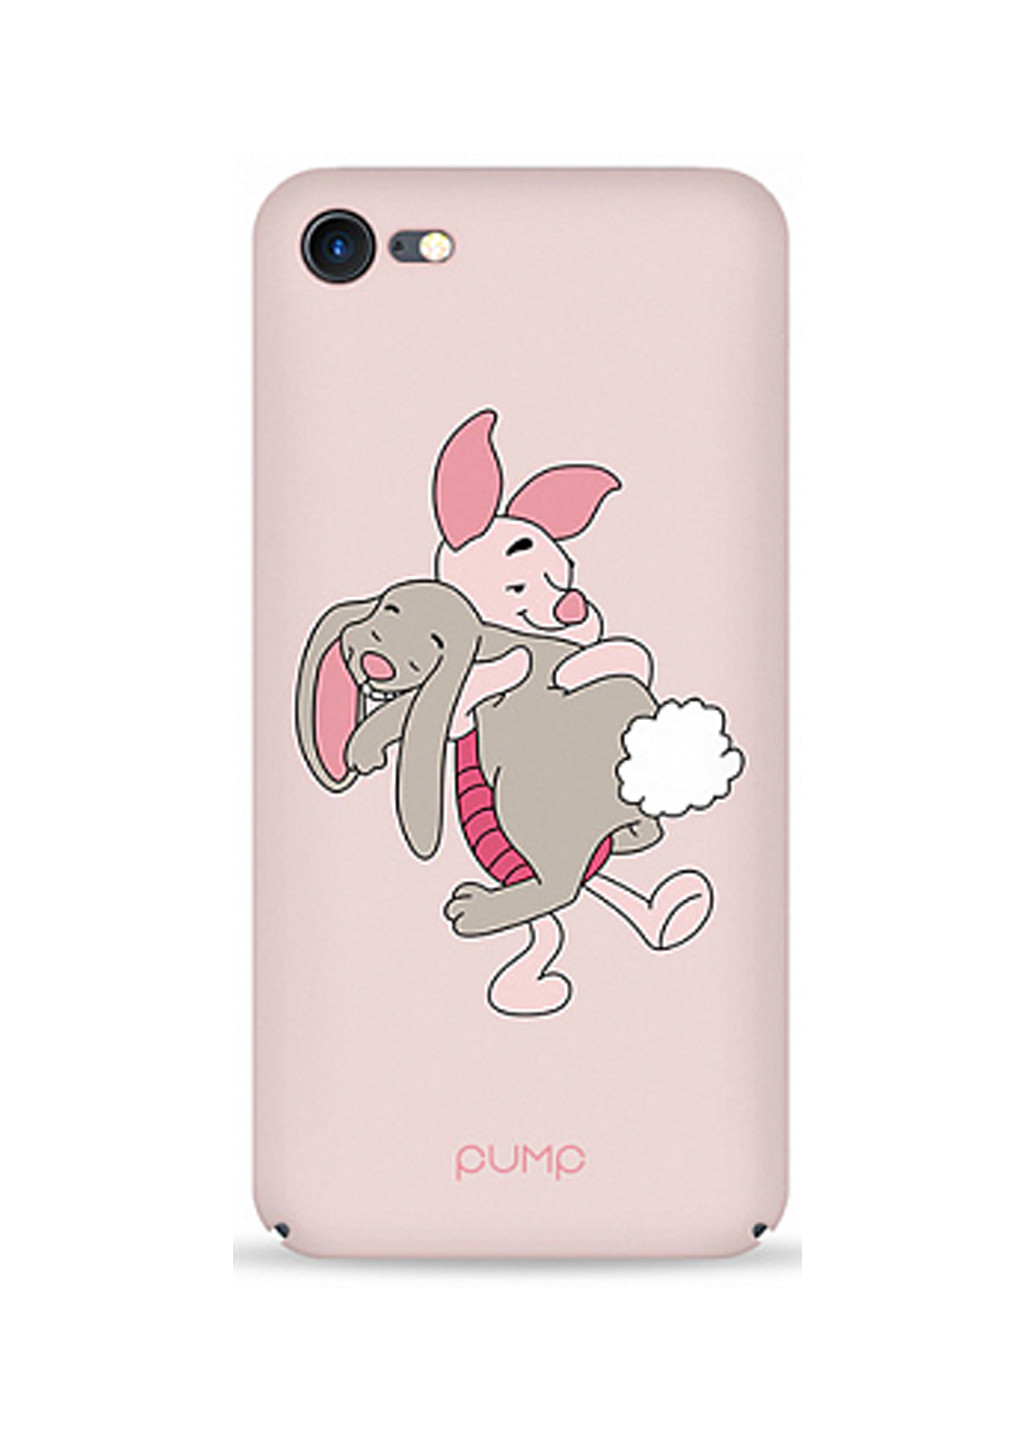 Чехол Tender Touch Case for iPhone 8/7 Piglet Pump tender touch case для iphone 8/7 piglet (136993690)